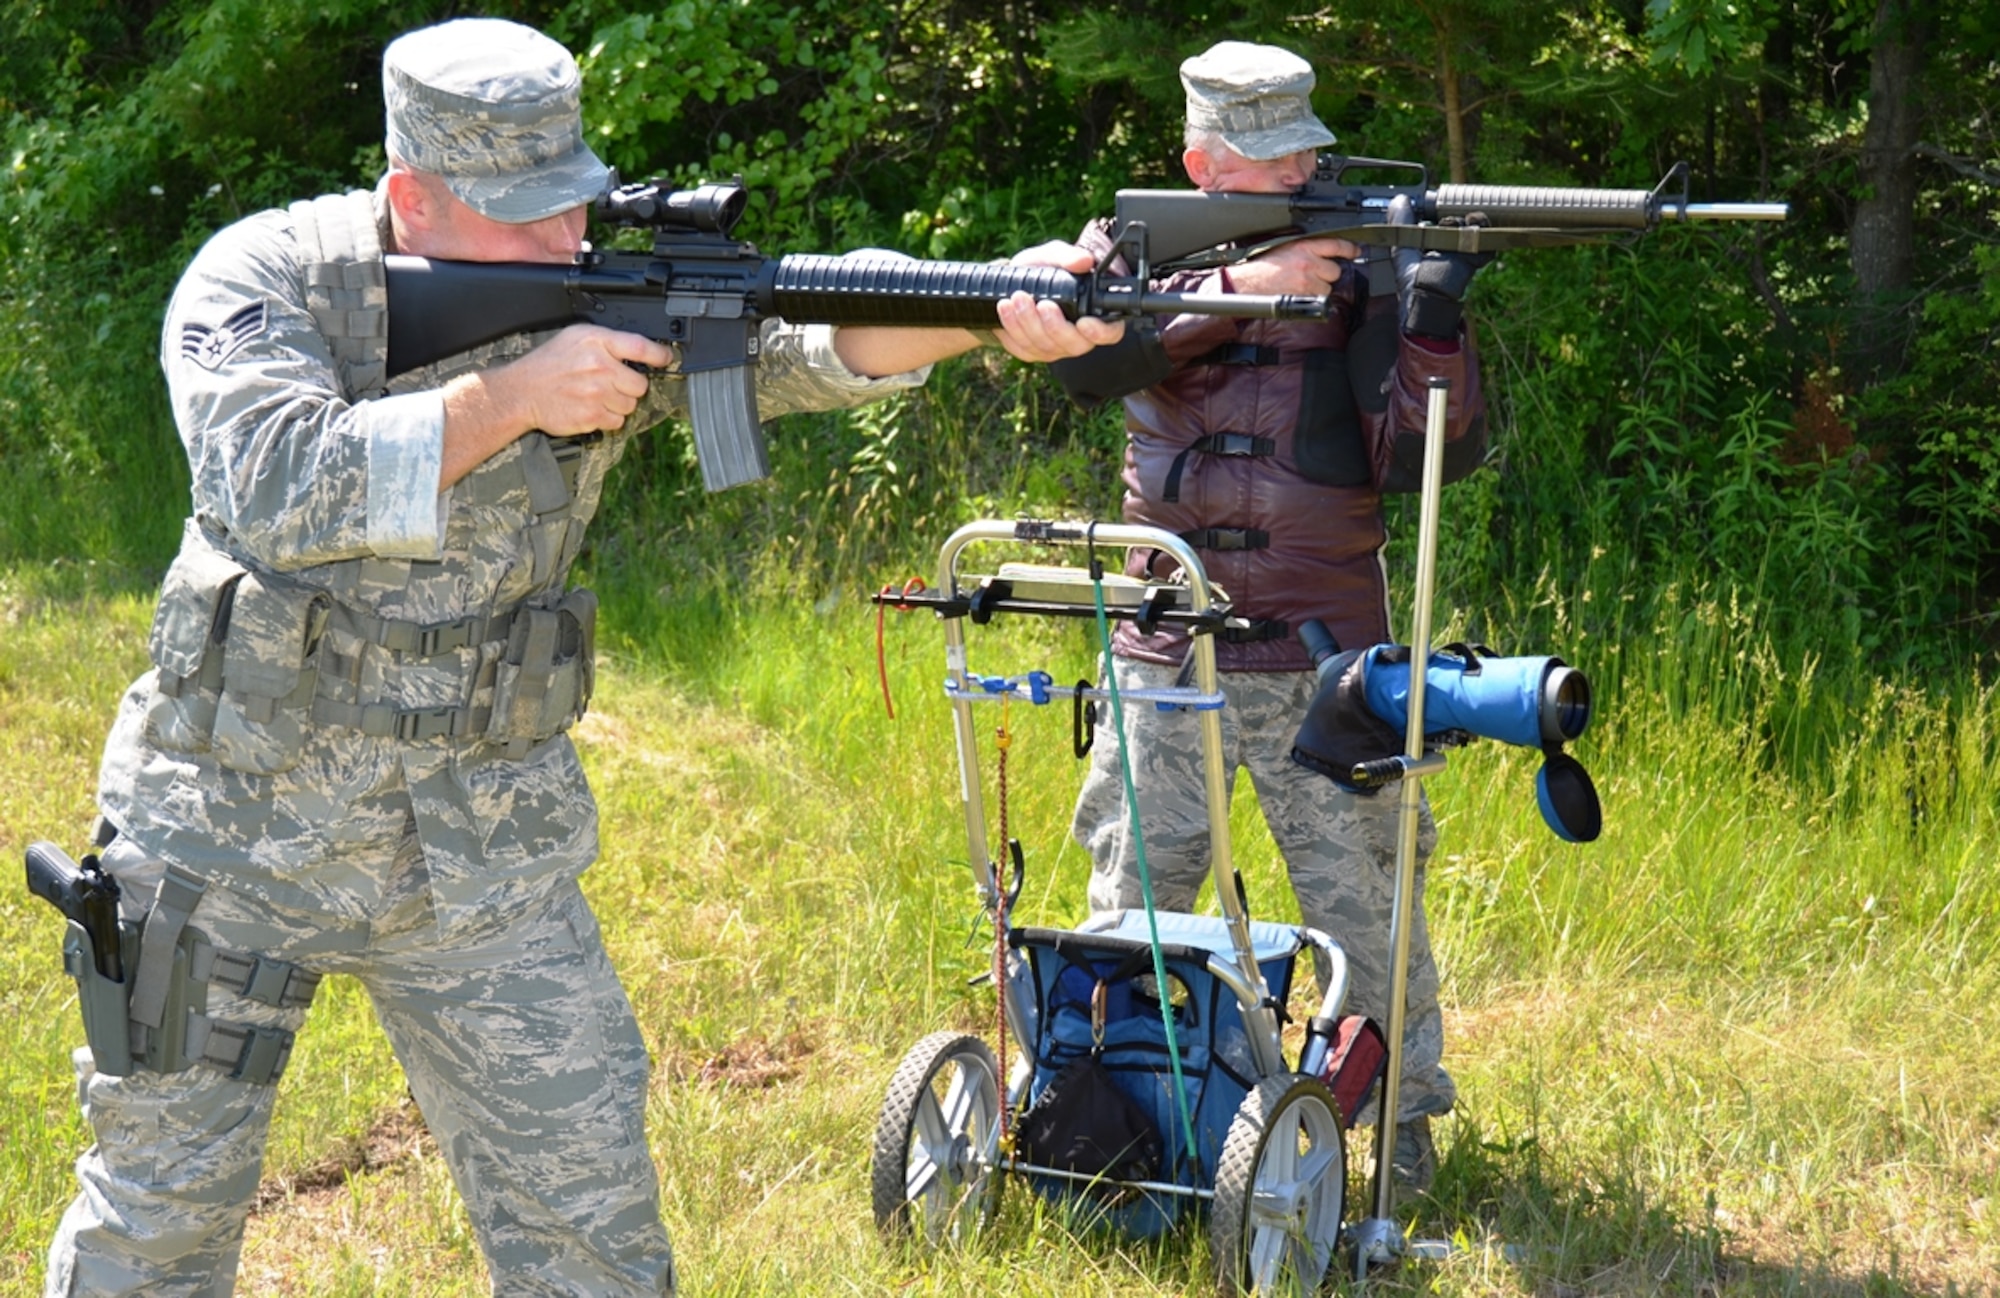 Maryland Air National Guardsman Senior Airman Evan Jones, right, electronic warfare pod technician, 175th Maintenance Squadron, and Master Sgt. Greg Blackstock, intelligence operations specialist, 175th Intelligence Squadron display their shooting technique with M16 rifles at Warfield Air National Guard Base in Baltimore, Md. on June 8, 2014. Jones has been awarded the Air Force Distinguished Rifleman and Pistol Badges this year and Blackstock earned the badges in 2000 and now mentors Jones. Jones is displaying the National Guard Combat team discipline and Blackstock is displaying the high power rifle team discipline. (U.S. Air National Guard photo by Tech. Sgt. David Speicher/RELEASED)